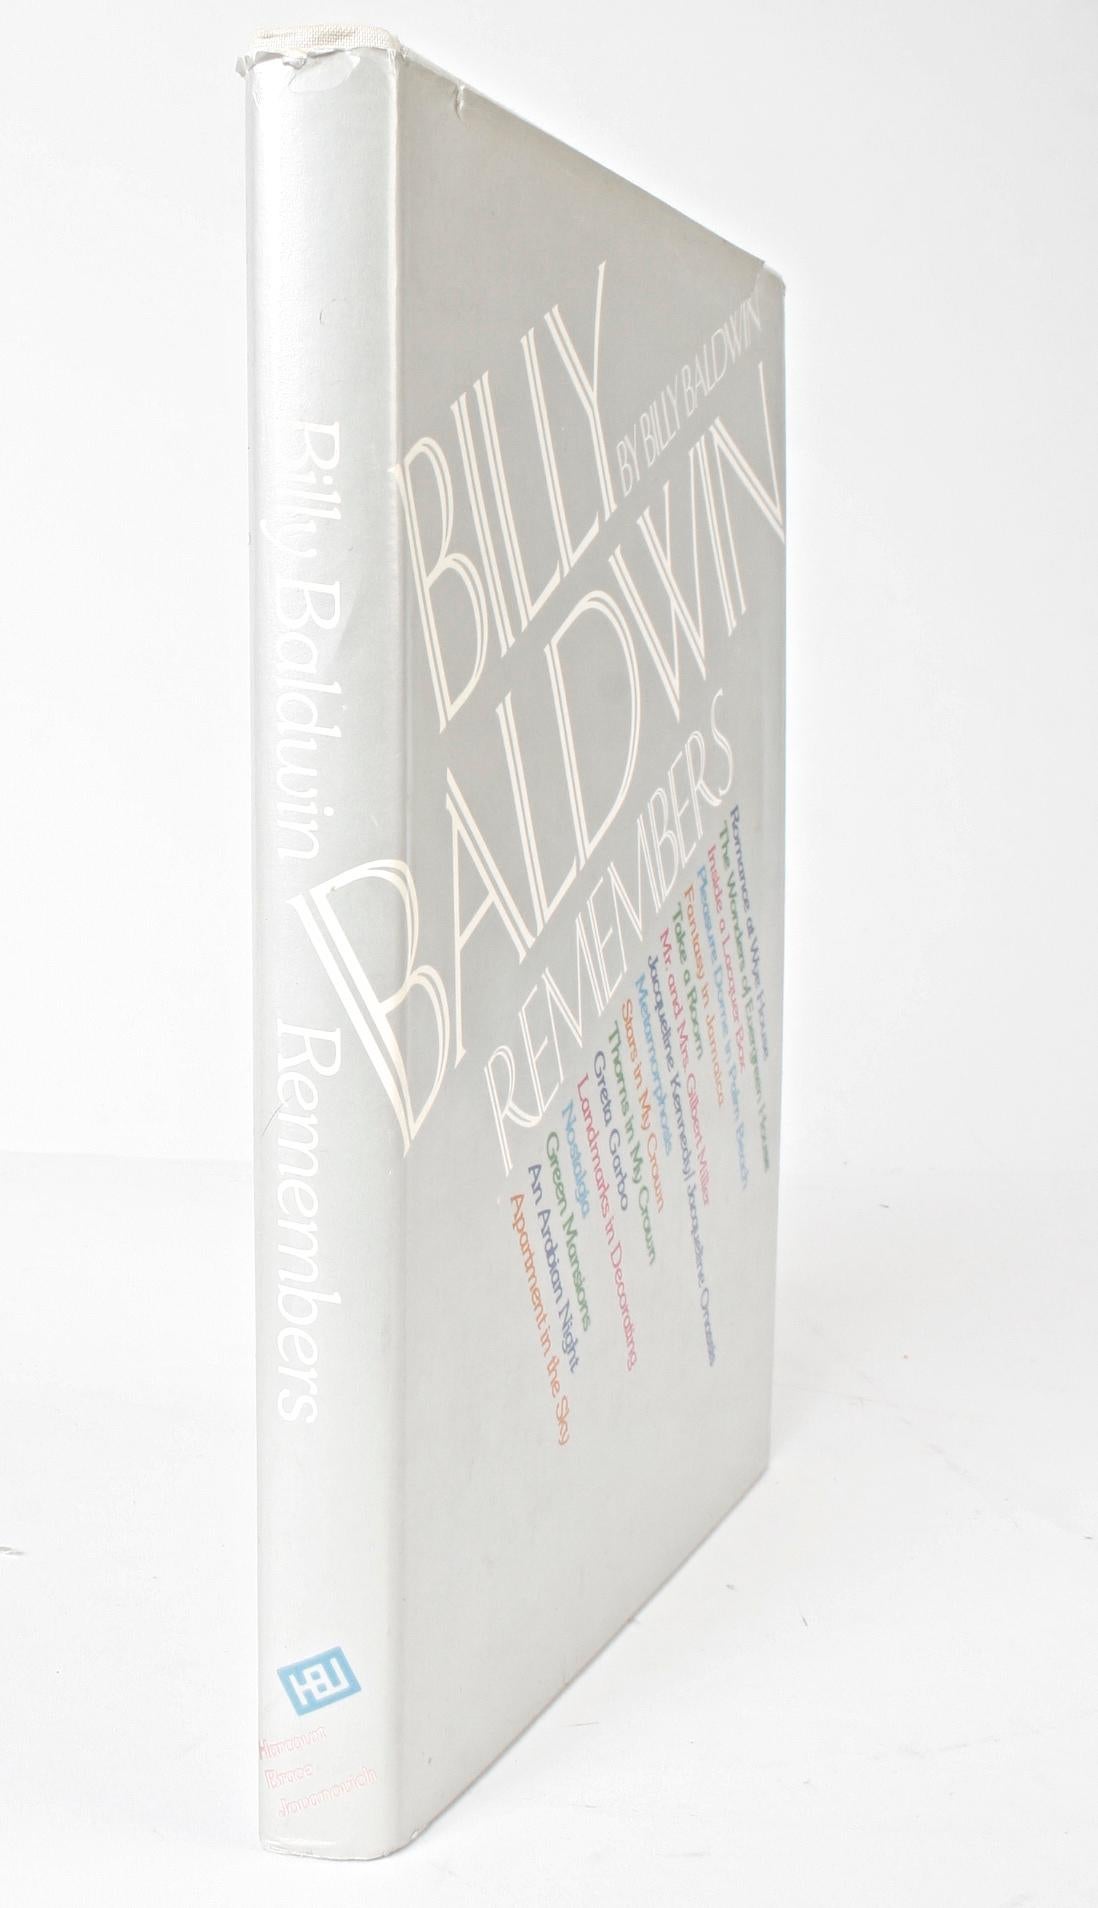 Billy Baldwin Remembers, by Billy Baldwin. Harcourt Brace Jovanovich, New York, 1974. Stated 1st Ed hardcover with dust jacket. 232 pp. A memoir by one of the most important decorators of this century, and his more than forty years of creating